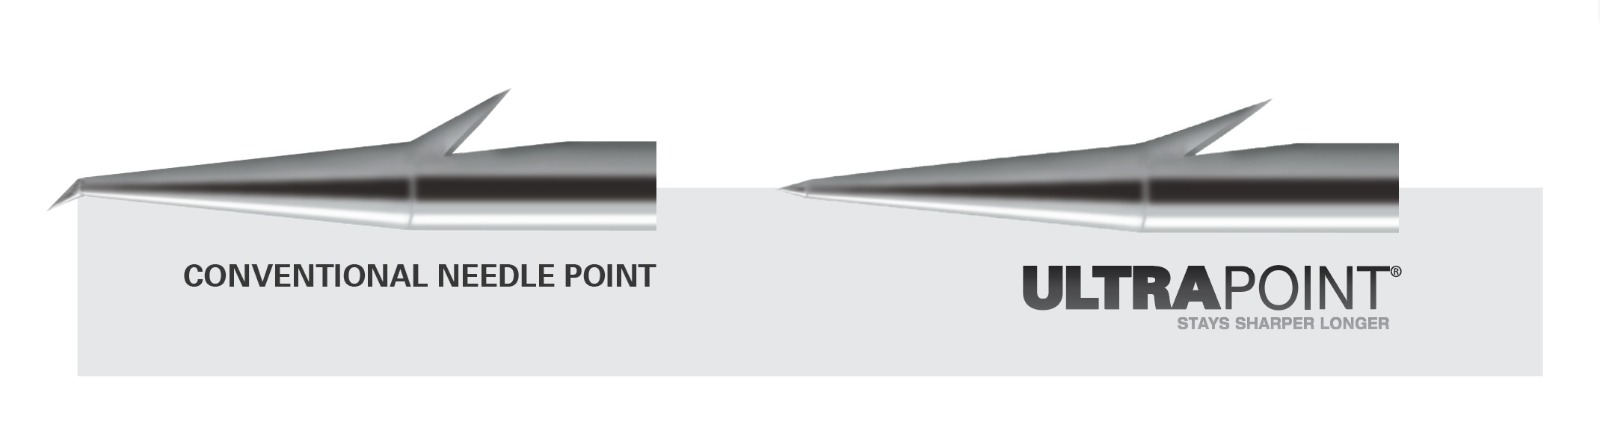 The UltraPoint Difference